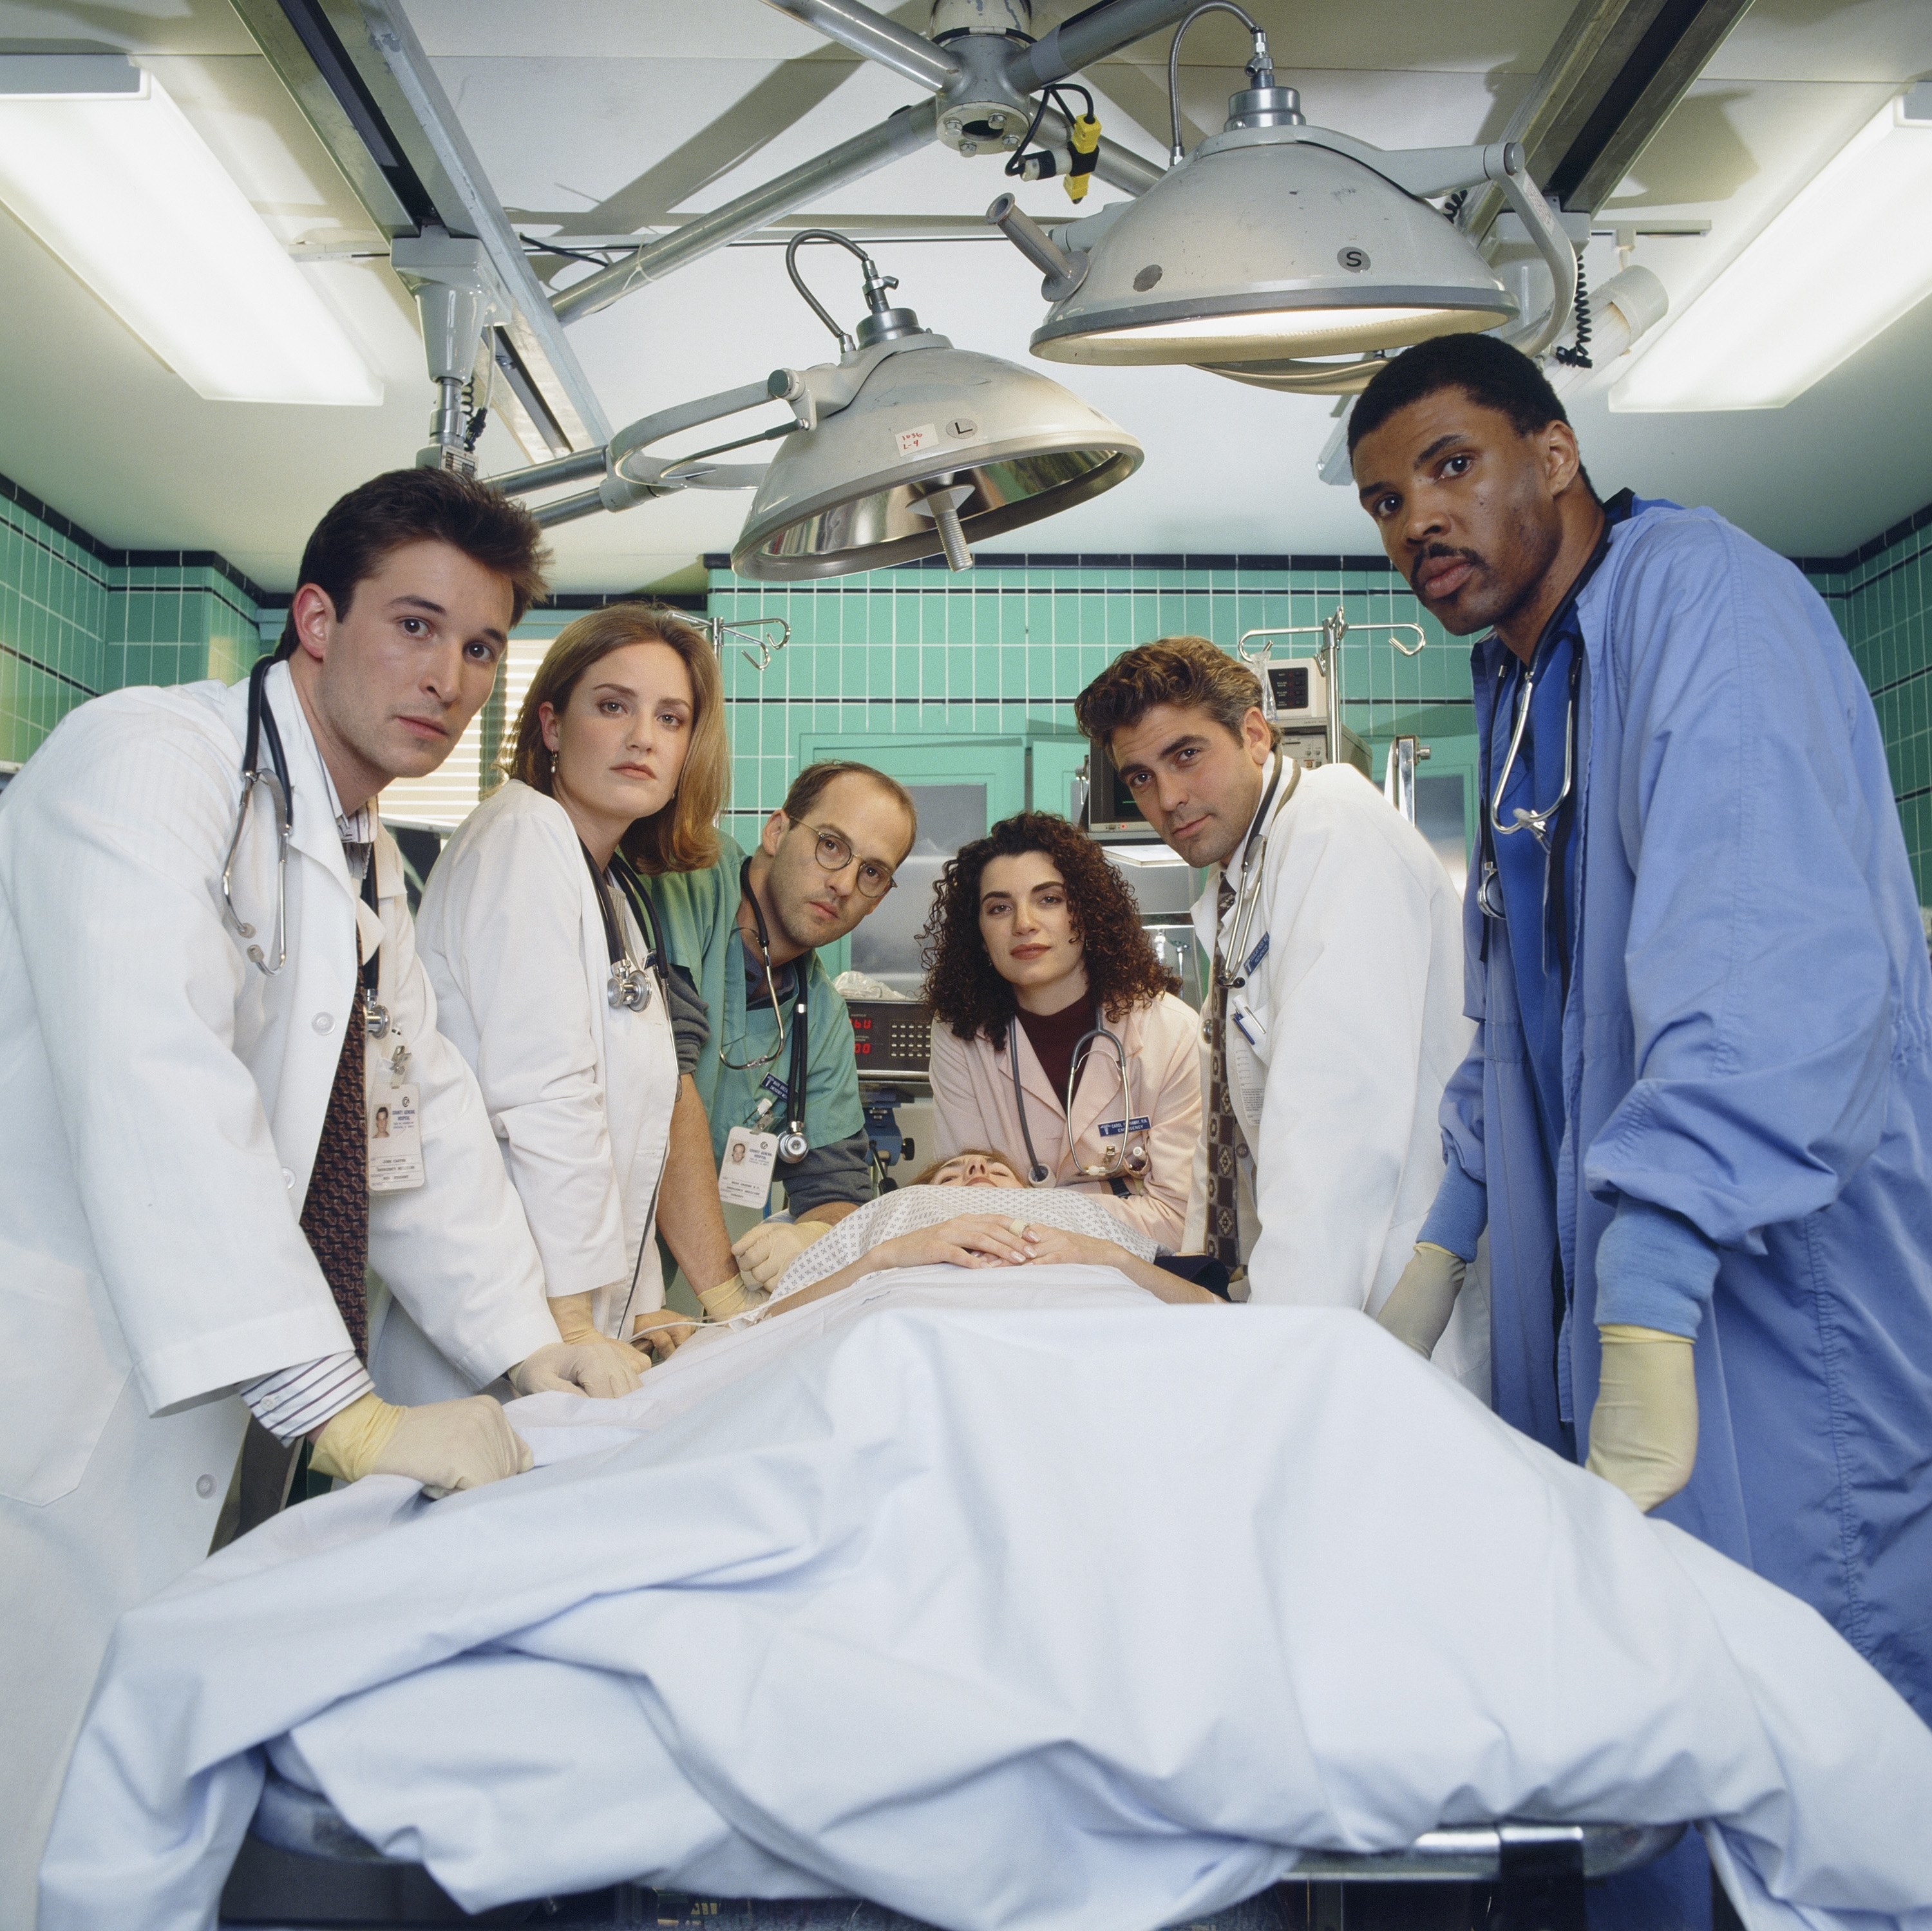 promo photo of the ER cast in an operating table